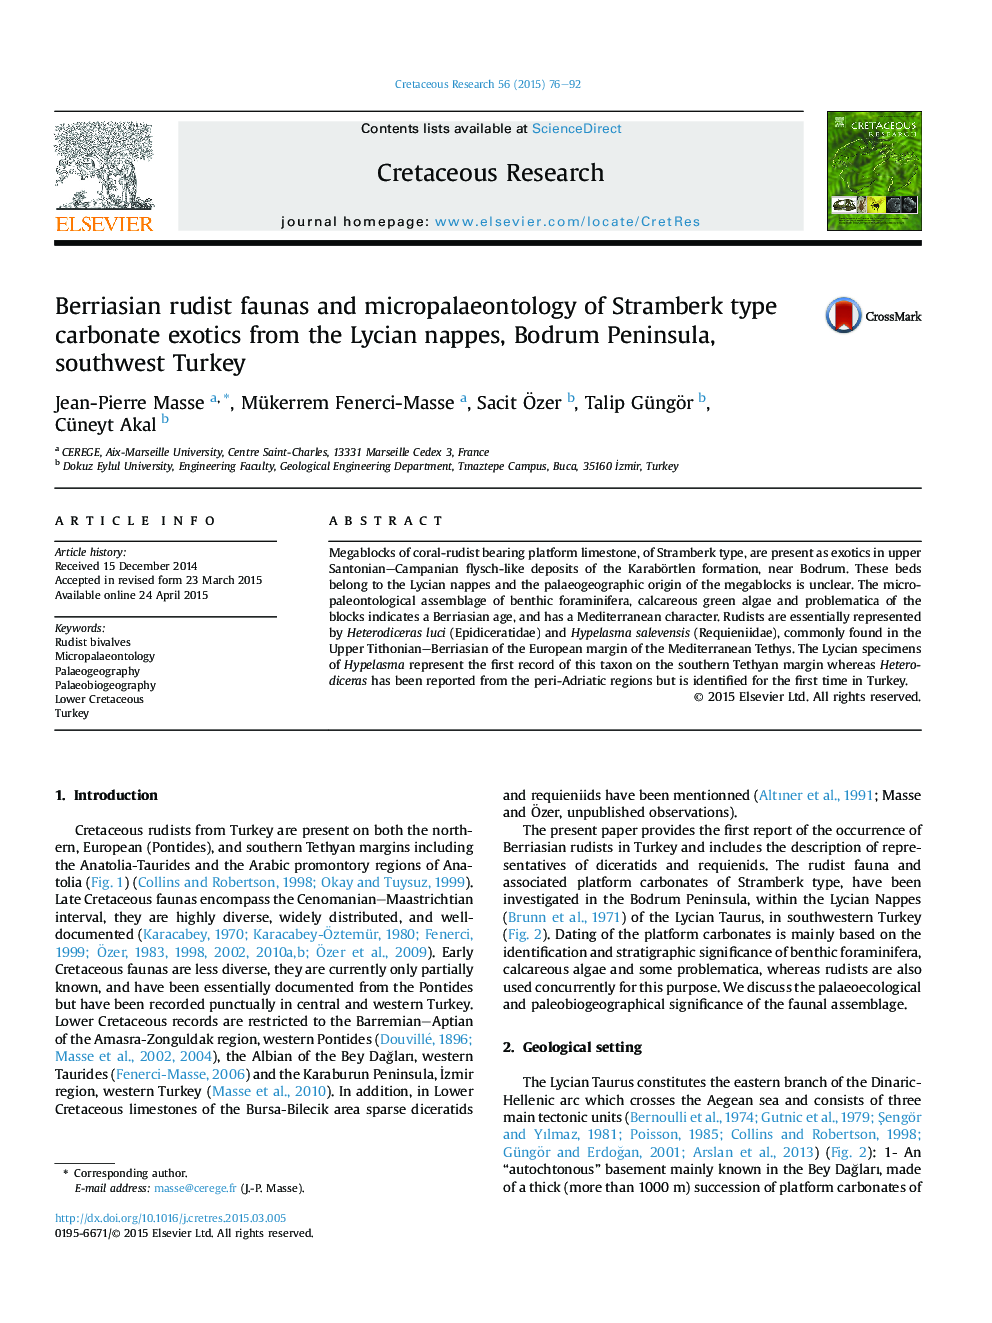 Berriasian rudist faunas and micropalaeontology of Stramberk type carbonate exotics from the Lycian nappes, Bodrum Peninsula, southwest Turkey